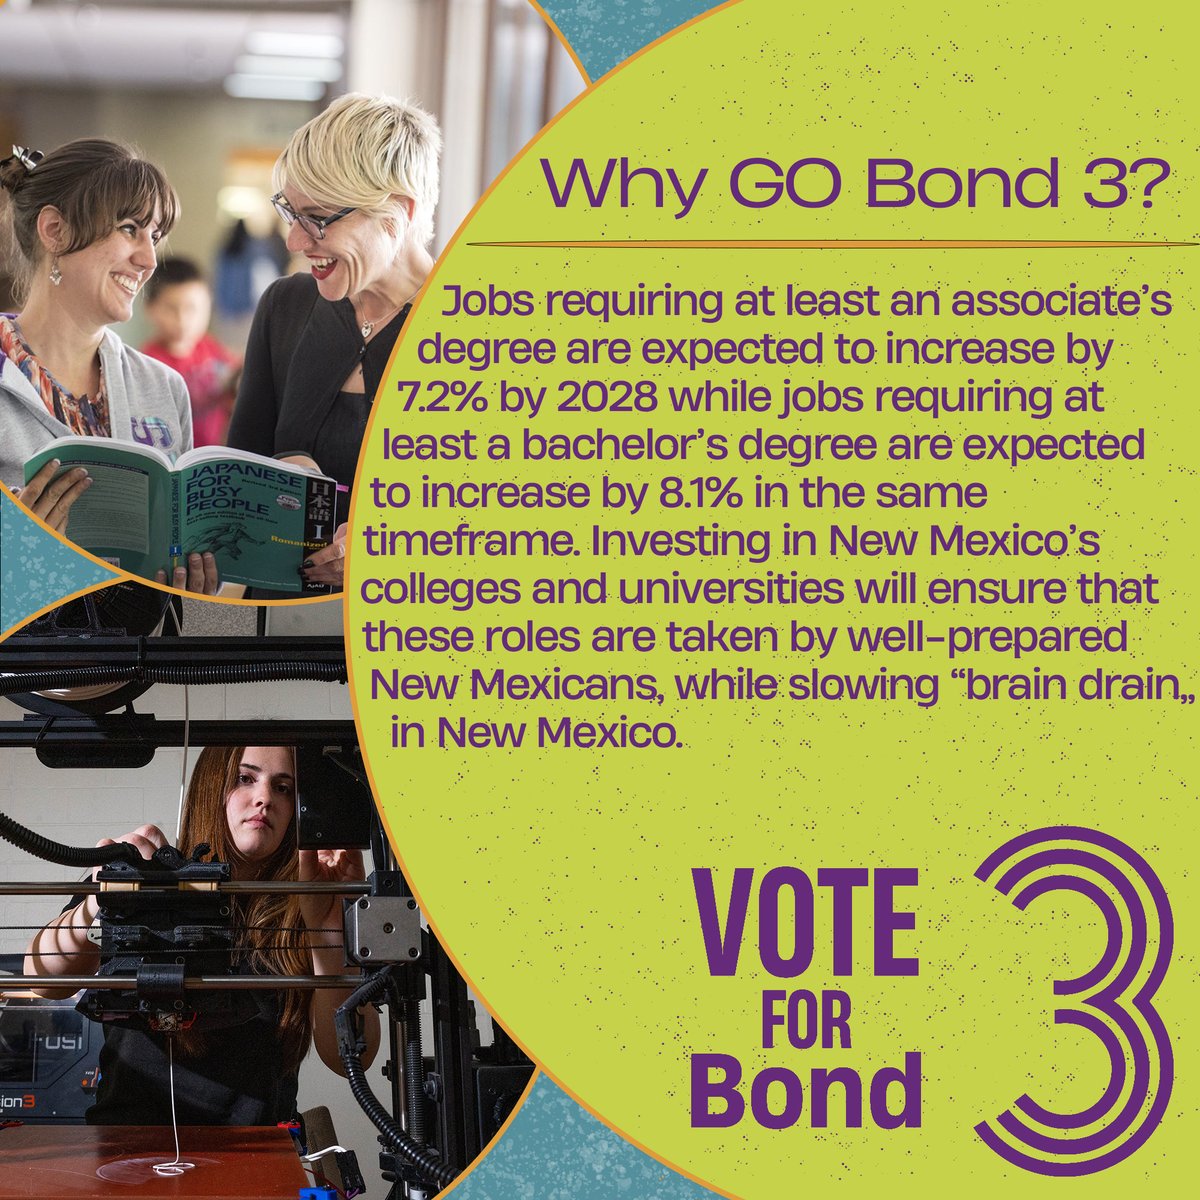 Economists estimate that by 2031, only 30% of jobs will be available to workers without a college degree. It's up to us to make sure well-prepared New Mexicans can feel those roles. Visit our website below for more information. 🔗 bondcfornm.com #BondCForNM